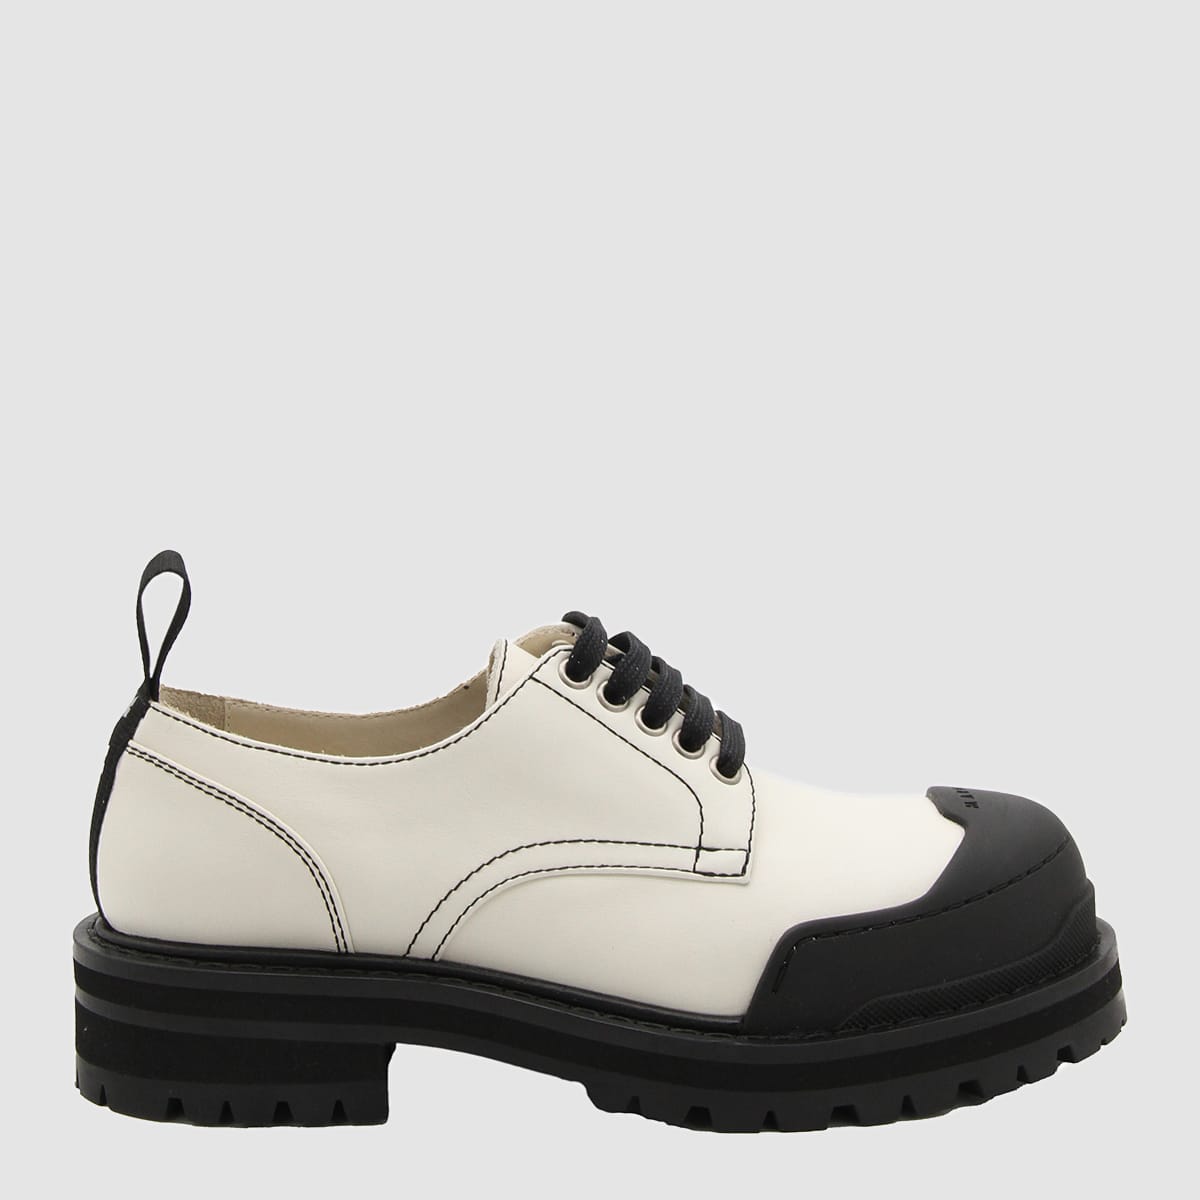 MARNI WHITE LEATHER DADA ARMY DERBY SHOES